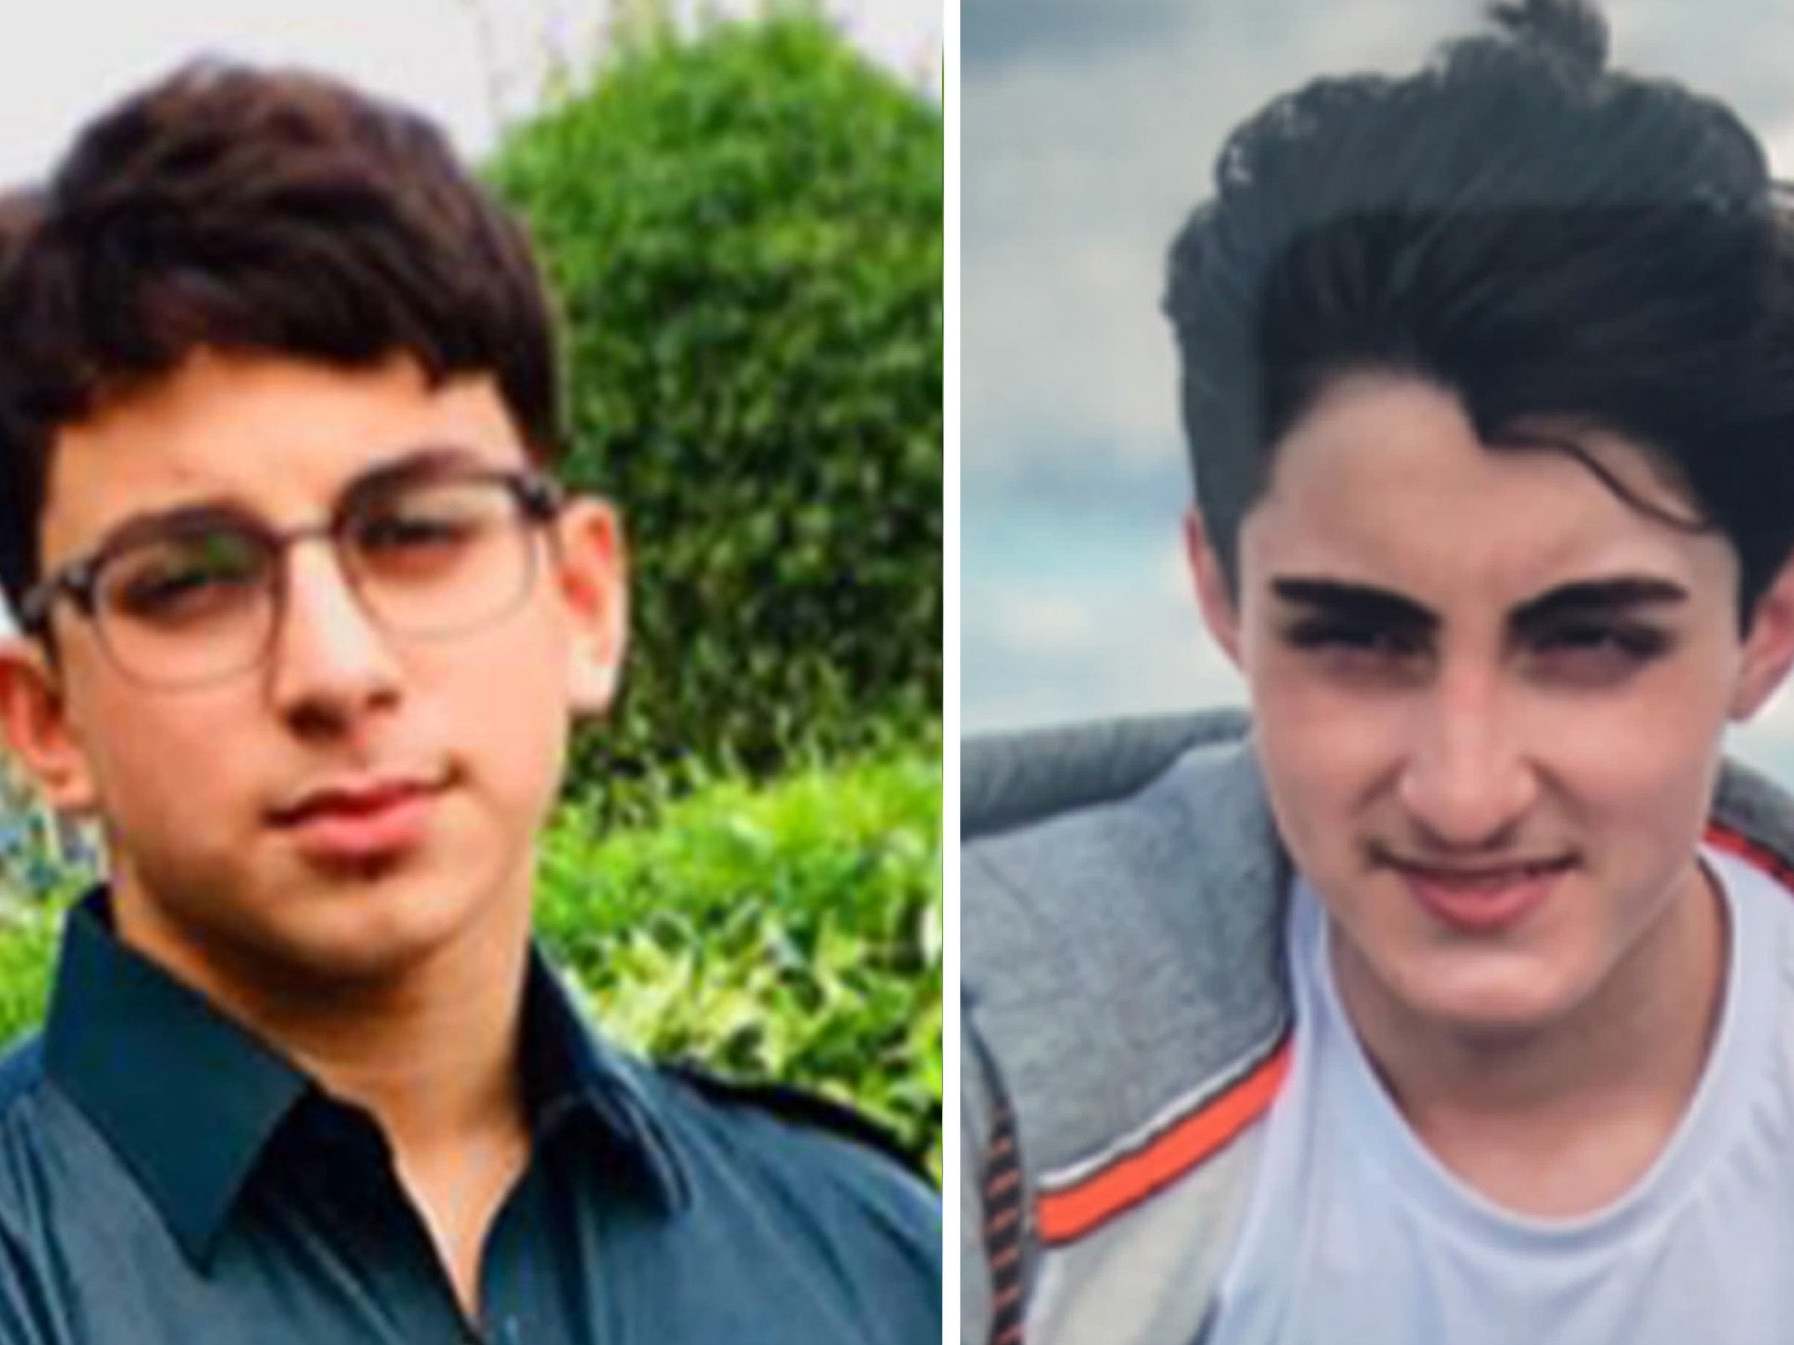 Muhammad Azhar Shabbir (left) and Ali Athar Shabbir went missing after getting into difficulty in water at St Annes, Lancashire, on Saturday